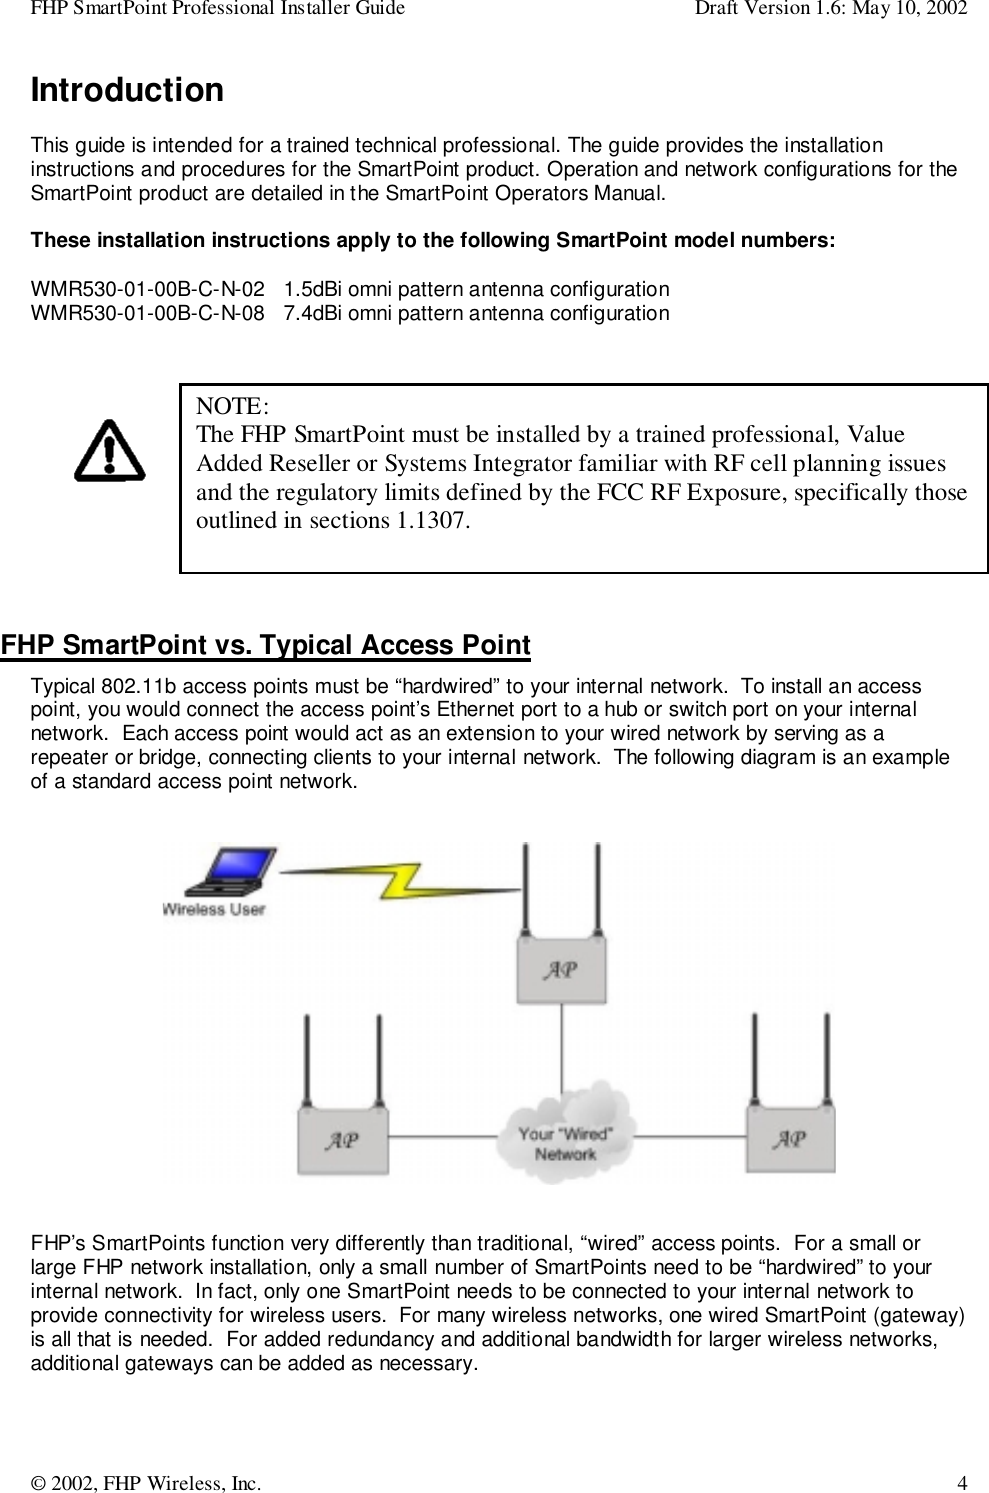 FHP SmartPoint Professional Installer Guide Draft Version 1.6: May 10, 2002© 2002, FHP Wireless, Inc. 4IntroductionThis guide is intended for a trained technical professional. The guide provides the installationinstructions and procedures for the SmartPoint product. Operation and network configurations for theSmartPoint product are detailed in the SmartPoint Operators Manual.These installation instructions apply to the following SmartPoint model numbers:WMR530-01-00B-C-N-02   1.5dBi omni pattern antenna configurationWMR530-01-00B-C-N-08   7.4dBi omni pattern antenna configurationFHP SmartPoint vs. Typical Access PointTypical 802.11b access points must be “hardwired” to your internal network.  To install an accesspoint, you would connect the access point’s Ethernet port to a hub or switch port on your internalnetwork.  Each access point would act as an extension to your wired network by serving as arepeater or bridge, connecting clients to your internal network.  The following diagram is an exampleof a standard access point network.FHP’s SmartPoints function very differently than traditional, “wired” access points.  For a small orlarge FHP network installation, only a small number of SmartPoints need to be “hardwired” to yourinternal network.  In fact, only one SmartPoint needs to be connected to your internal network toprovide connectivity for wireless users.  For many wireless networks, one wired SmartPoint (gateway)is all that is needed.  For added redundancy and additional bandwidth for larger wireless networks,additional gateways can be added as necessary.NOTE:The FHP SmartPoint must be installed by a trained professional, ValueAdded Reseller or Systems Integrator familiar with RF cell planning issuesand the regulatory limits defined by the FCC RF Exposure, specifically thoseoutlined in sections 1.1307.